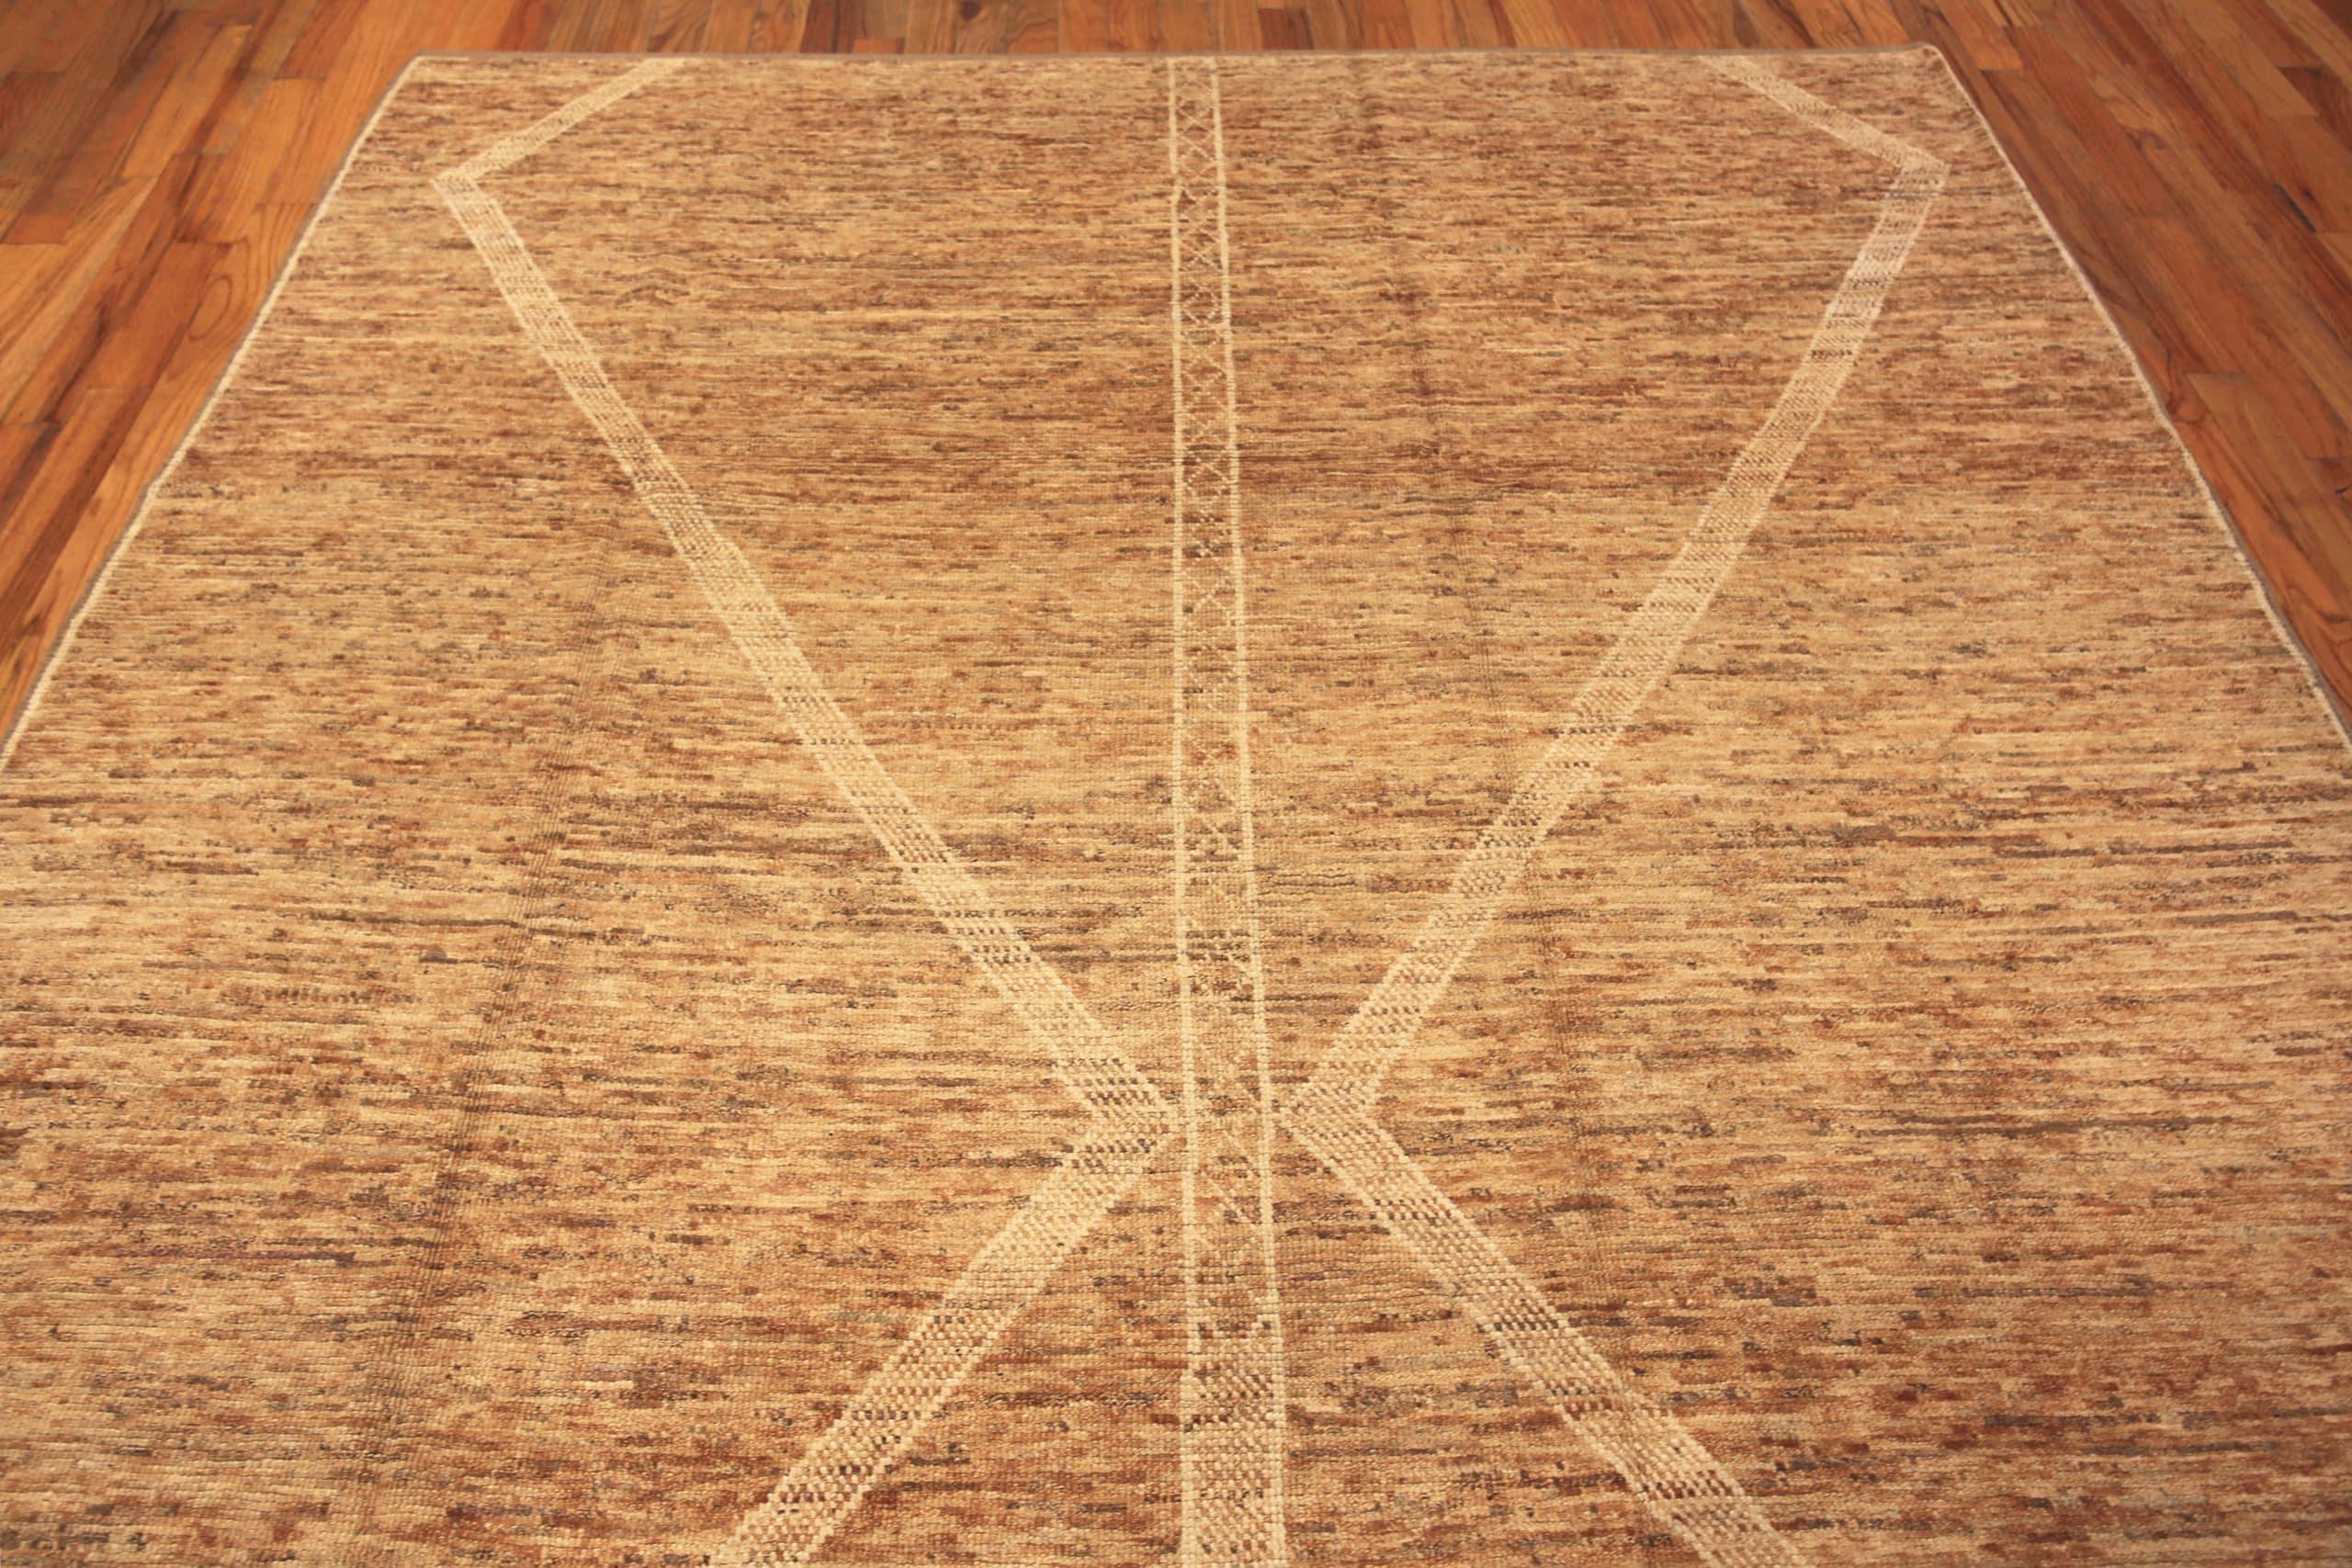 Nazmiyal Collection Minimalist Tribal Primitive Design Rust Tones Modern Area Rug. Country of Origin: Central Asia, Circa date: Modern
 
